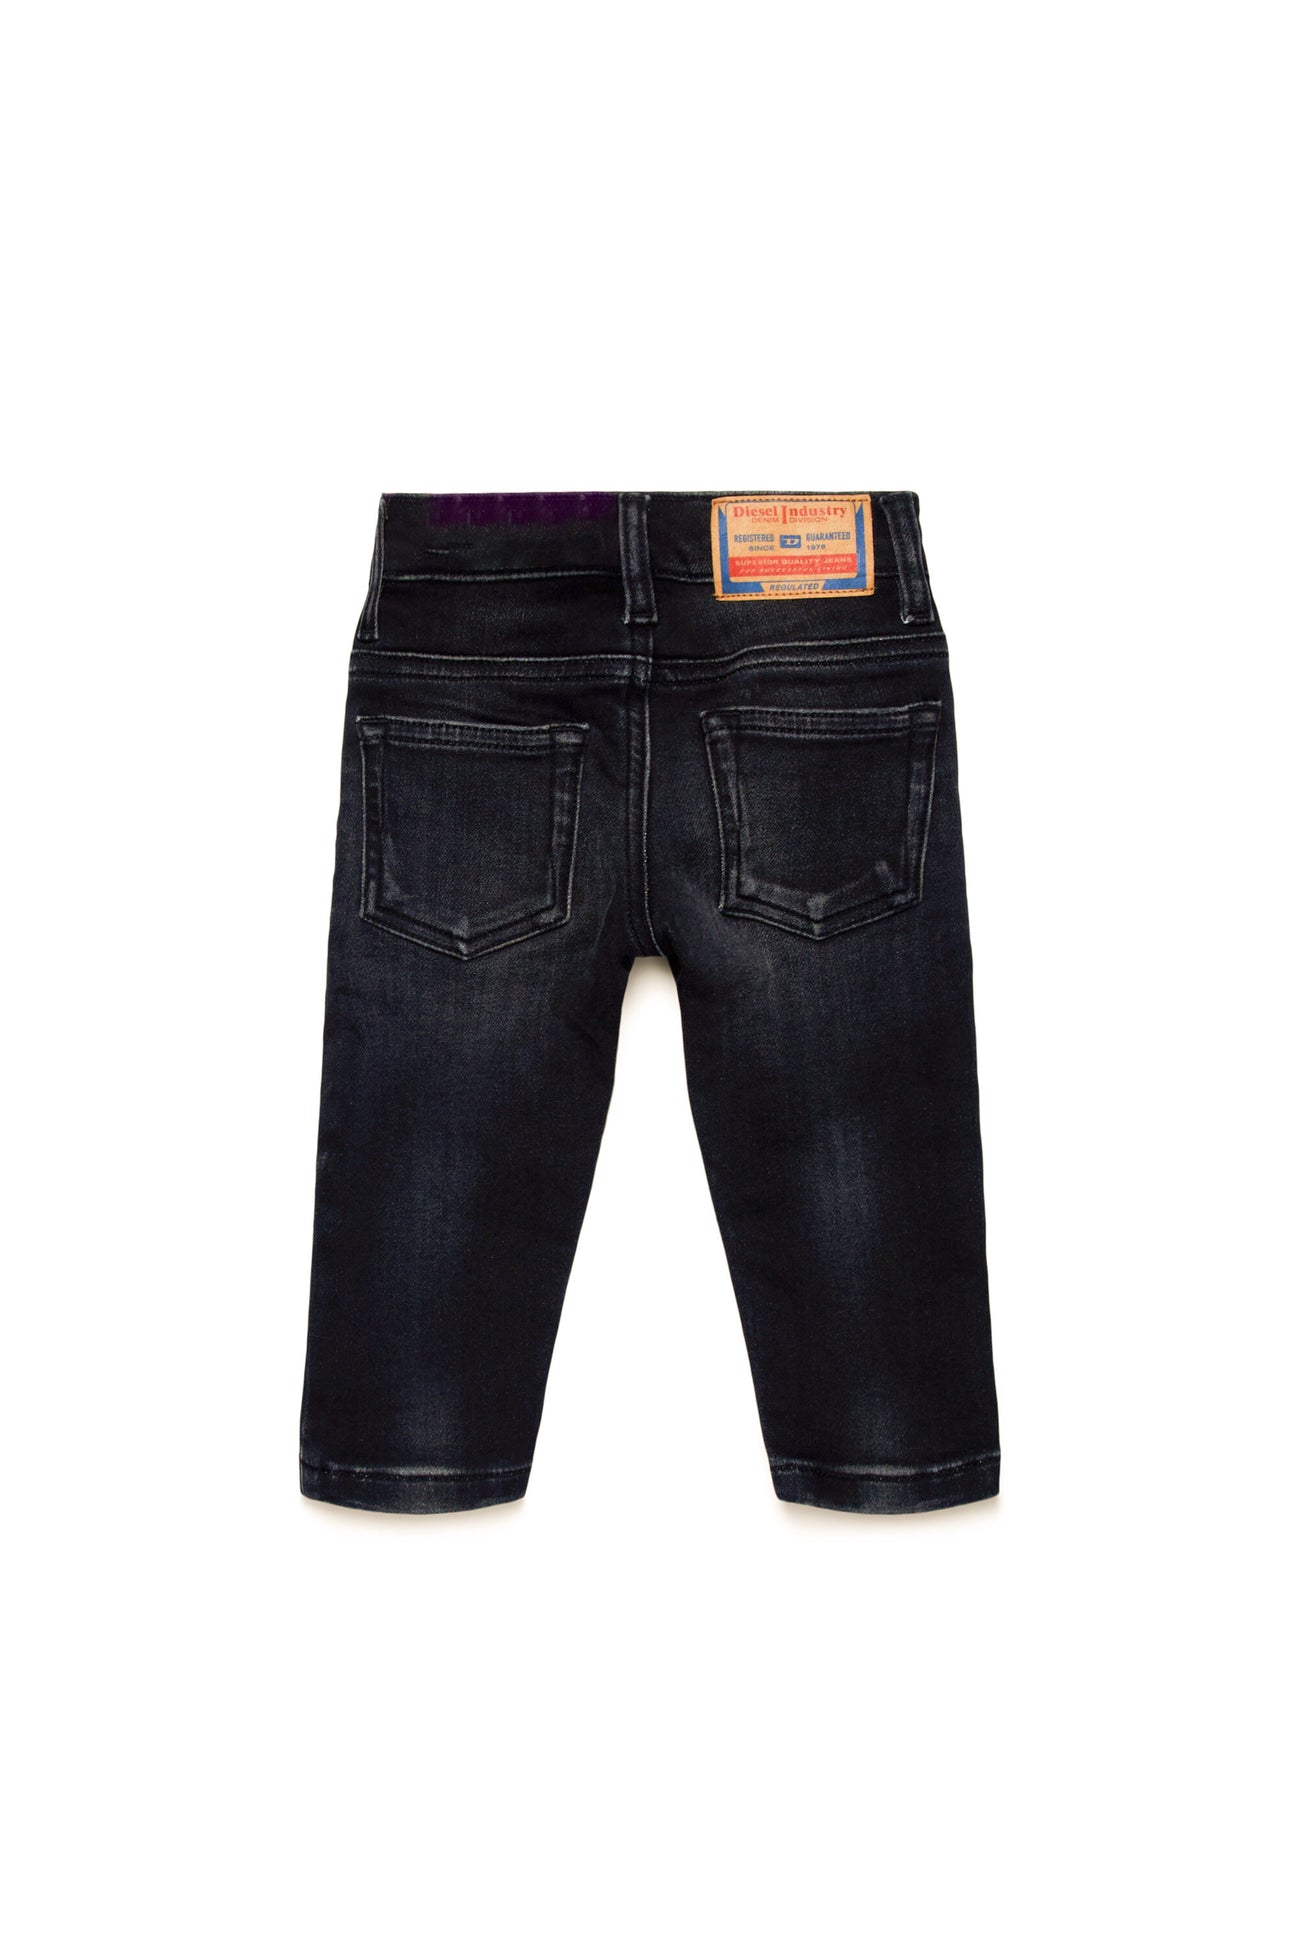 Black straight JoggJeans® with abrasions - D-Jools-B Black straight JoggJeans® with abrasions - D-Jools-B